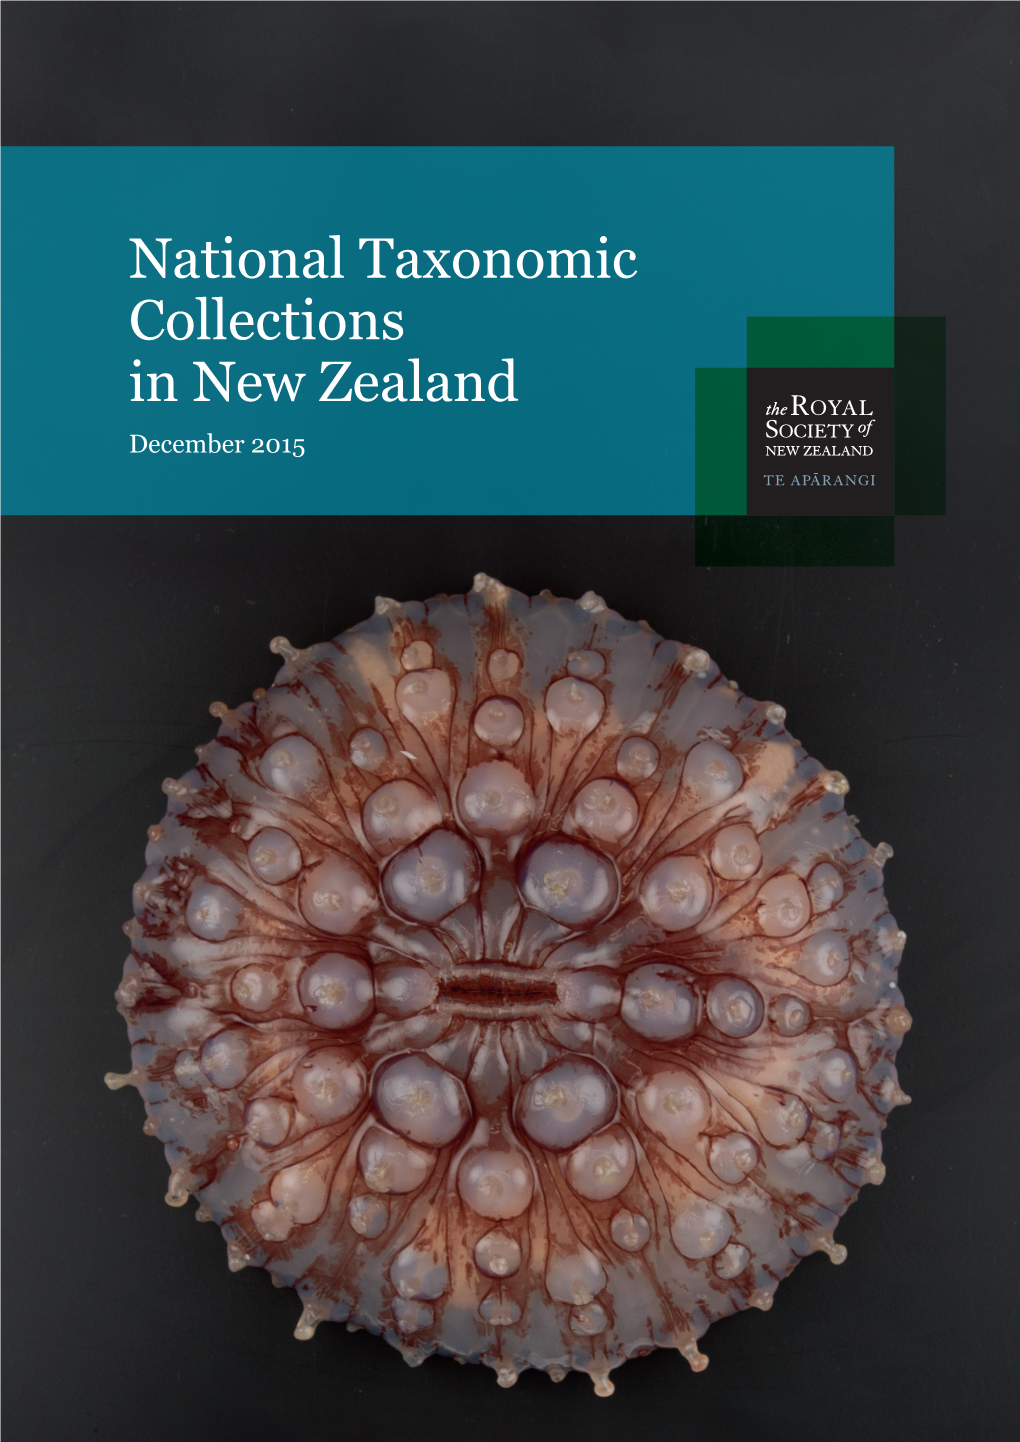 National Taxonomic Collections in New Zealand 2015